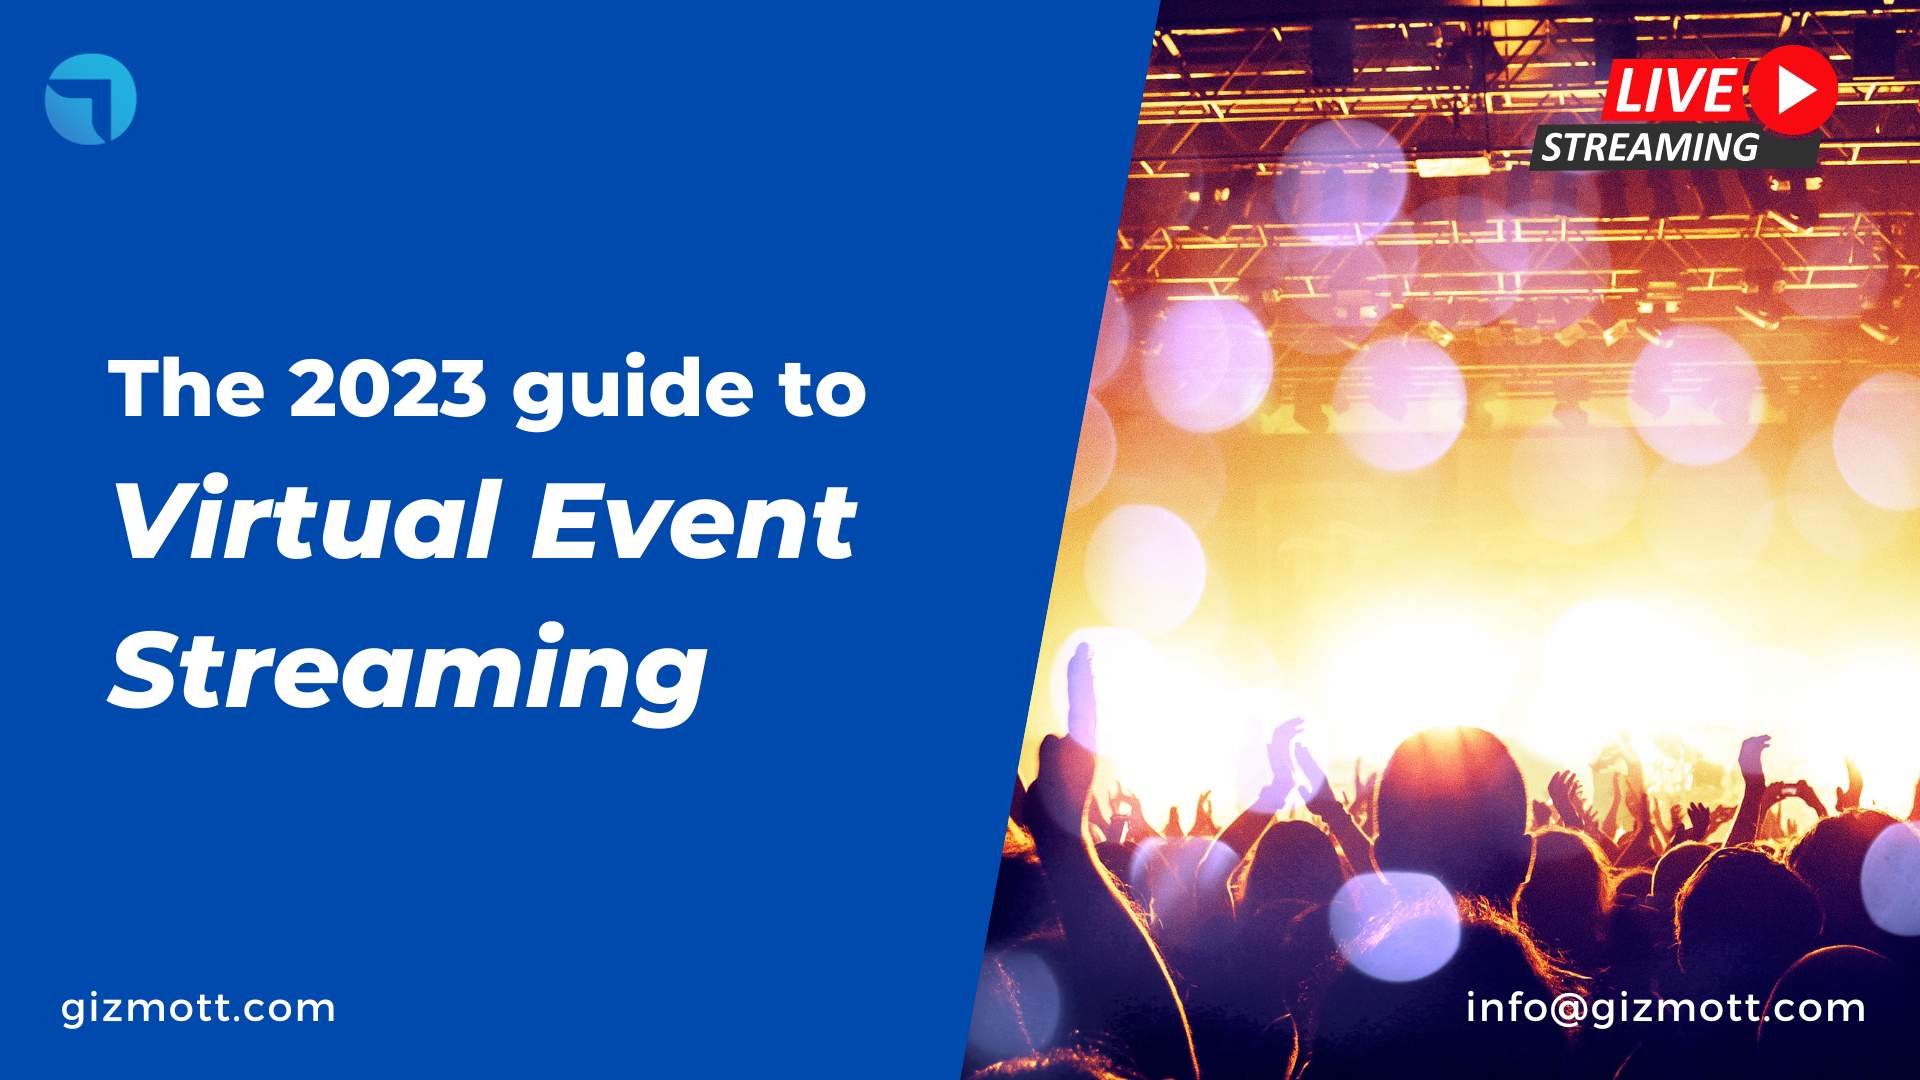 The 2023 guide to Virtual Event Streaming